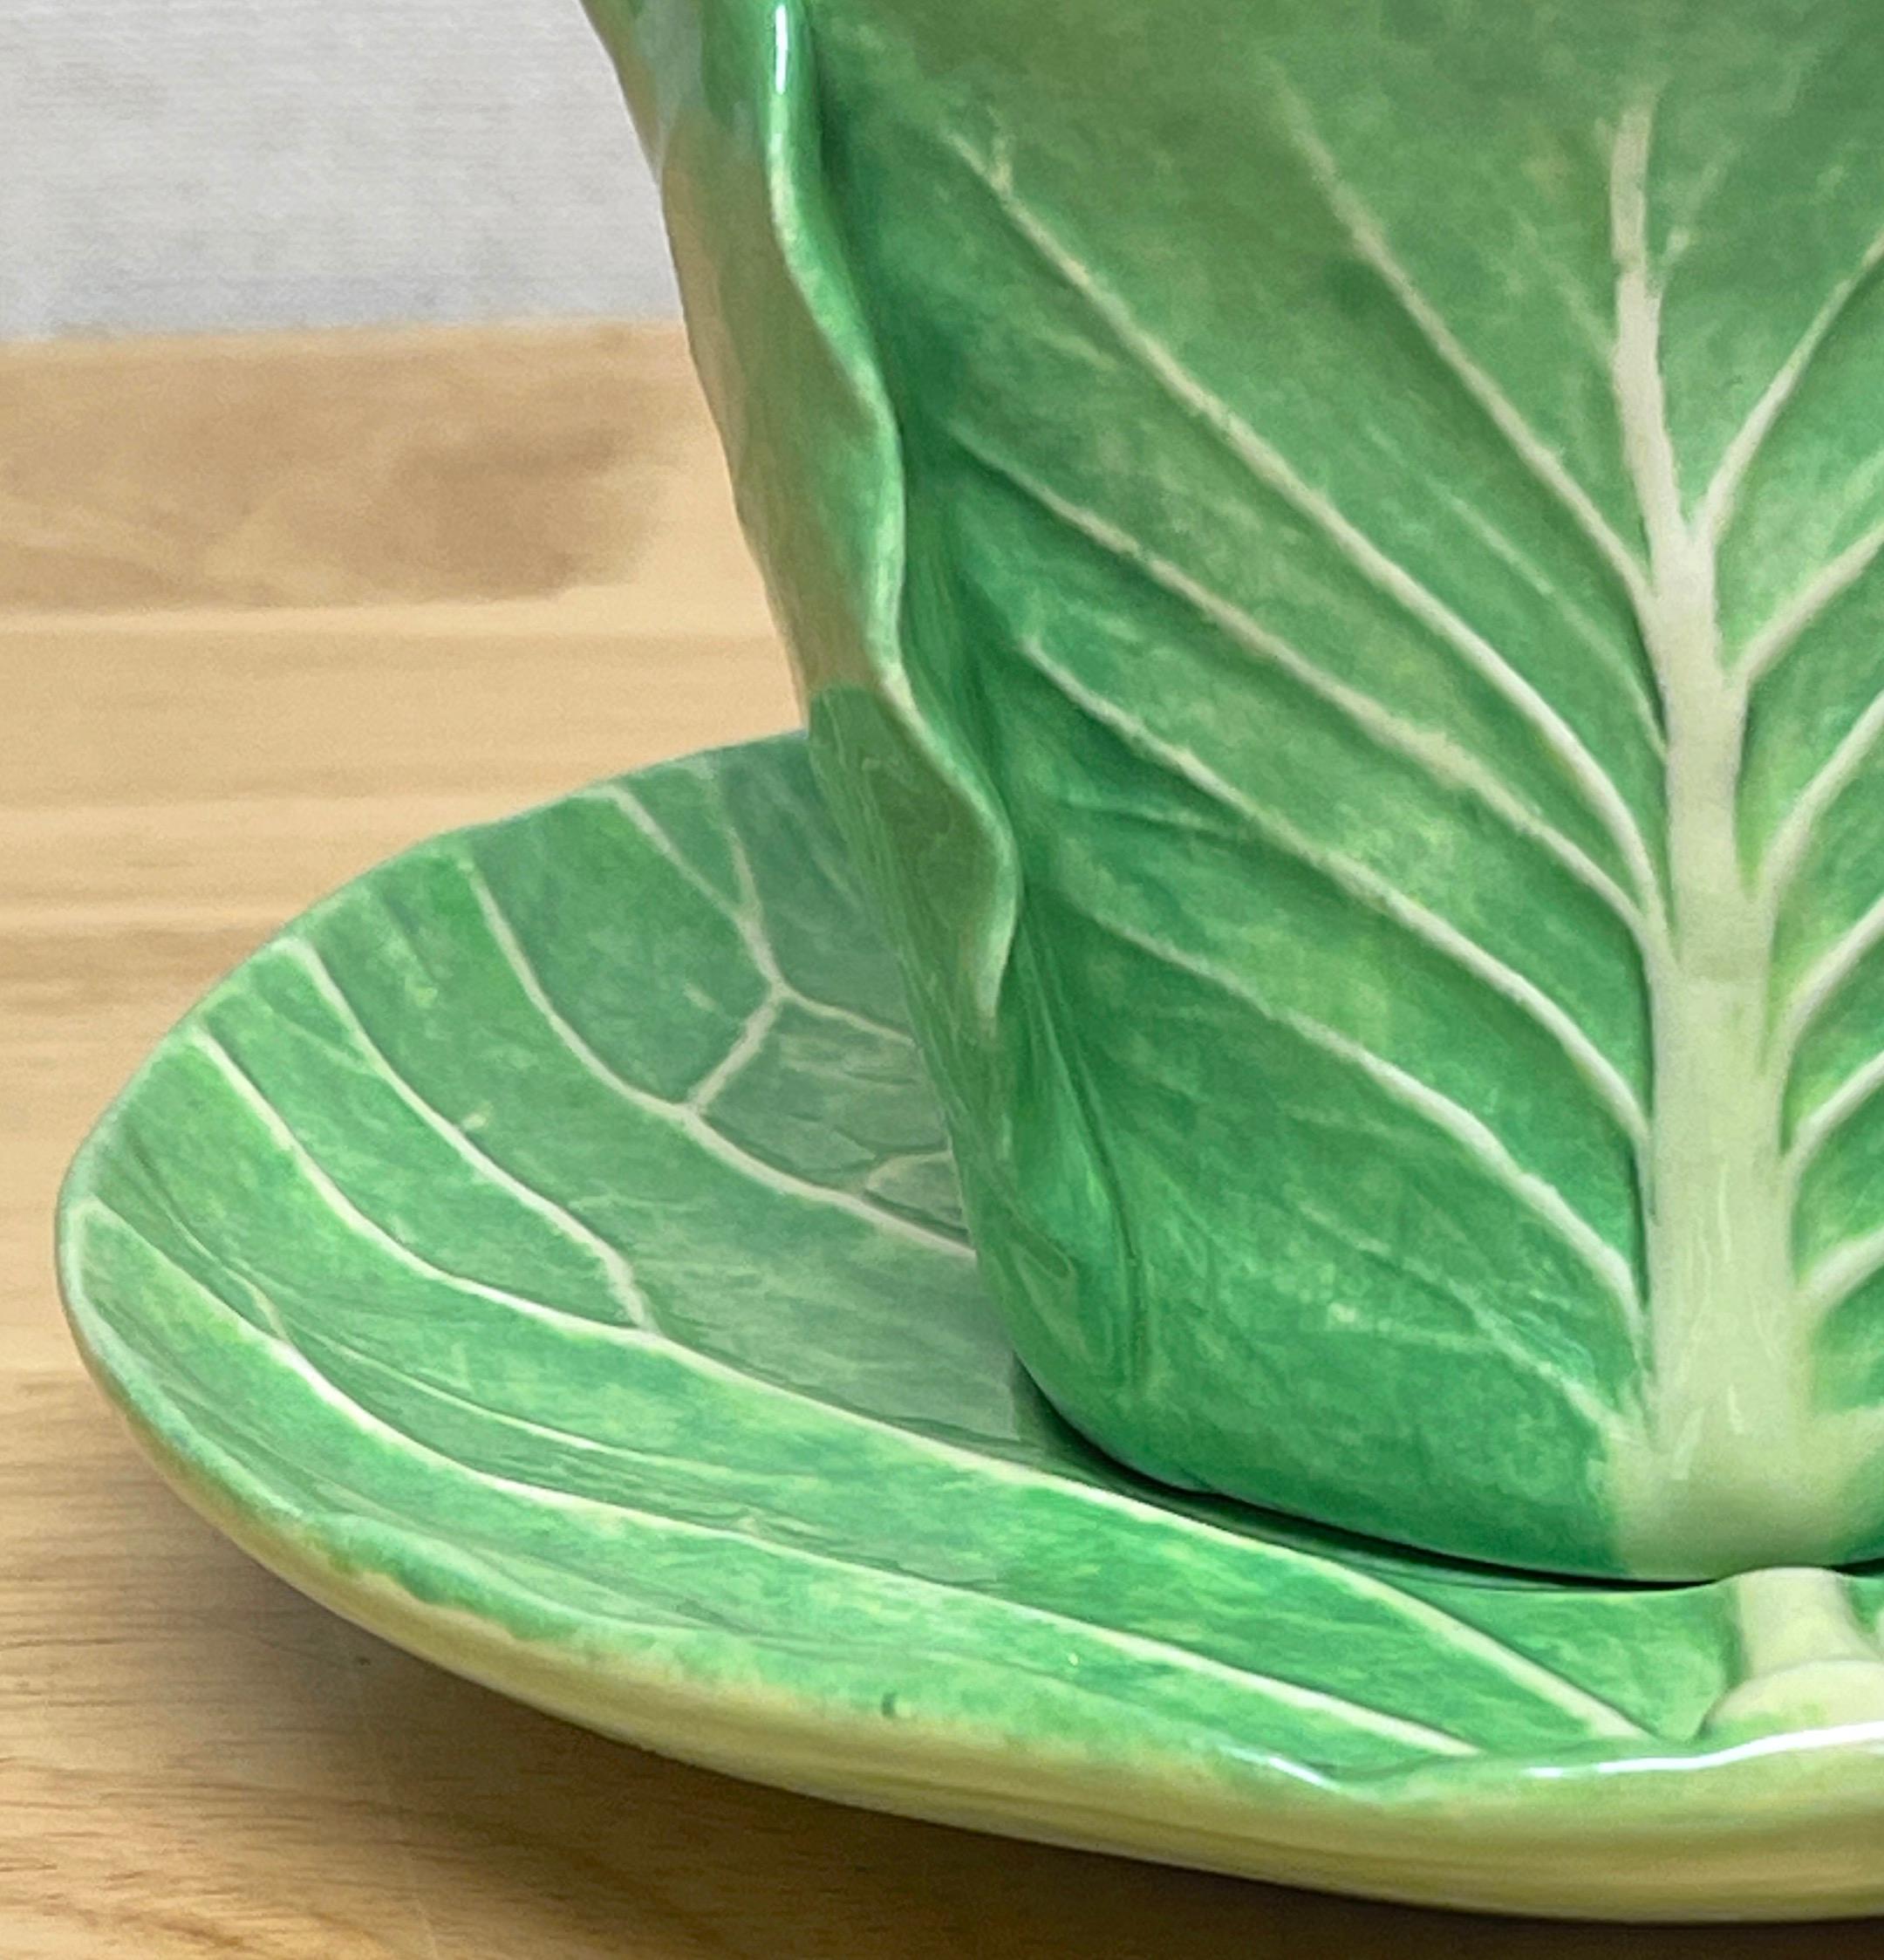 Dodie Thayer 'Jumbo' Lettuce Leaf Cup & Saucer, 5 Available, Sold Individually 2